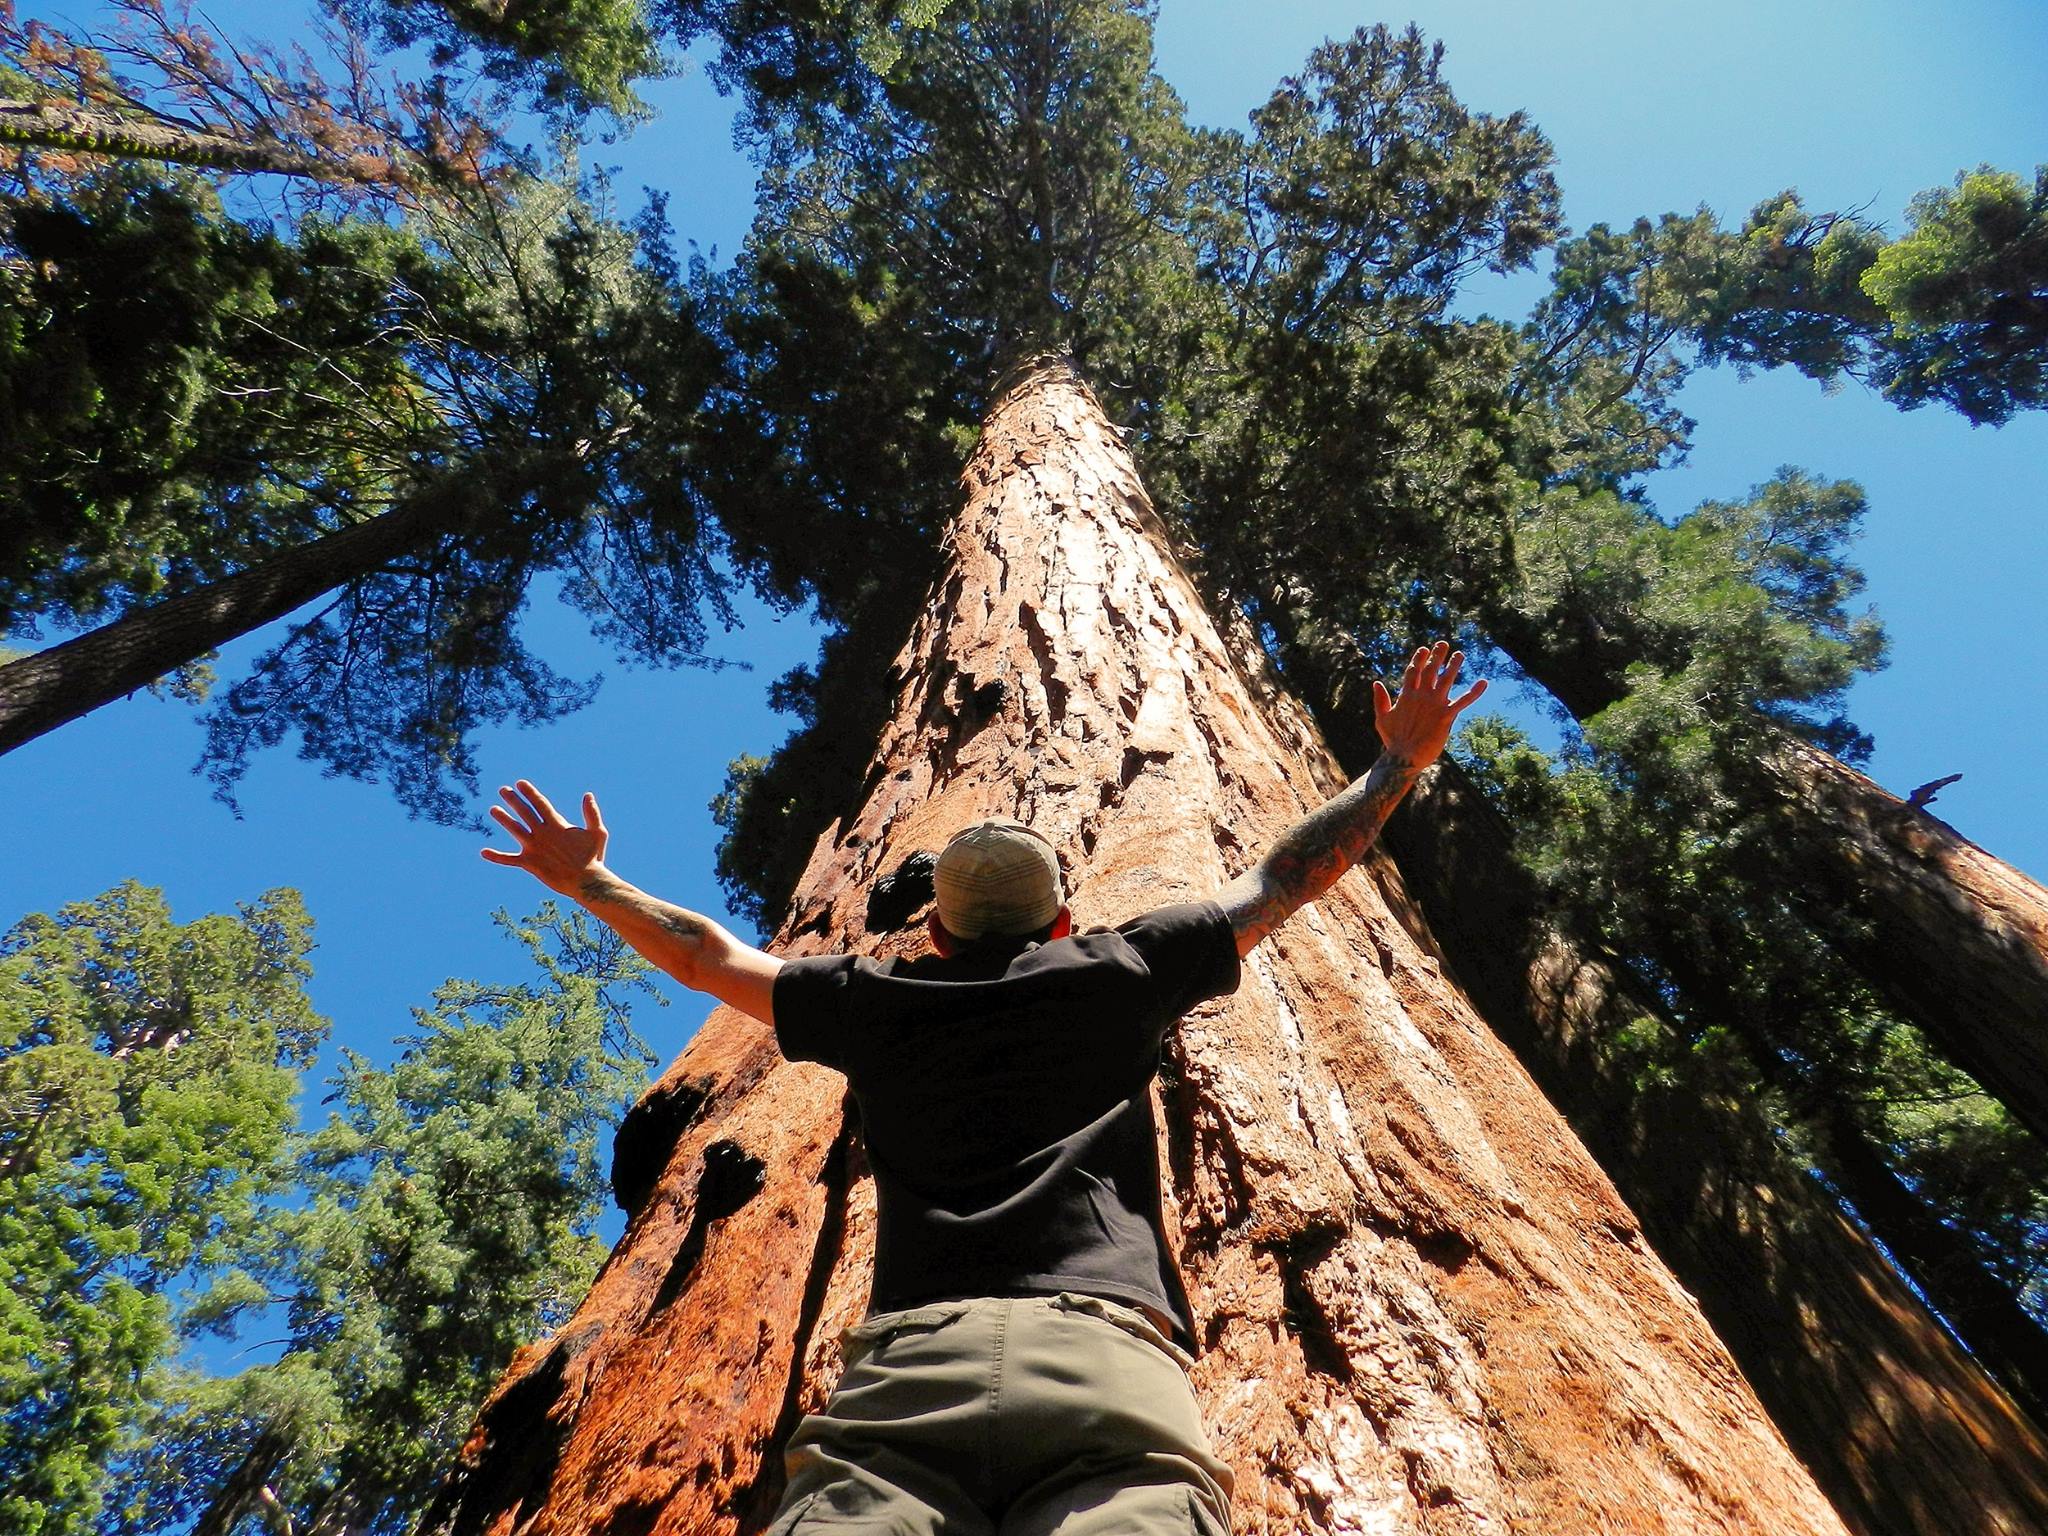 Low angle shot of a person with arms raised overhead in front of a gigantic conifer.